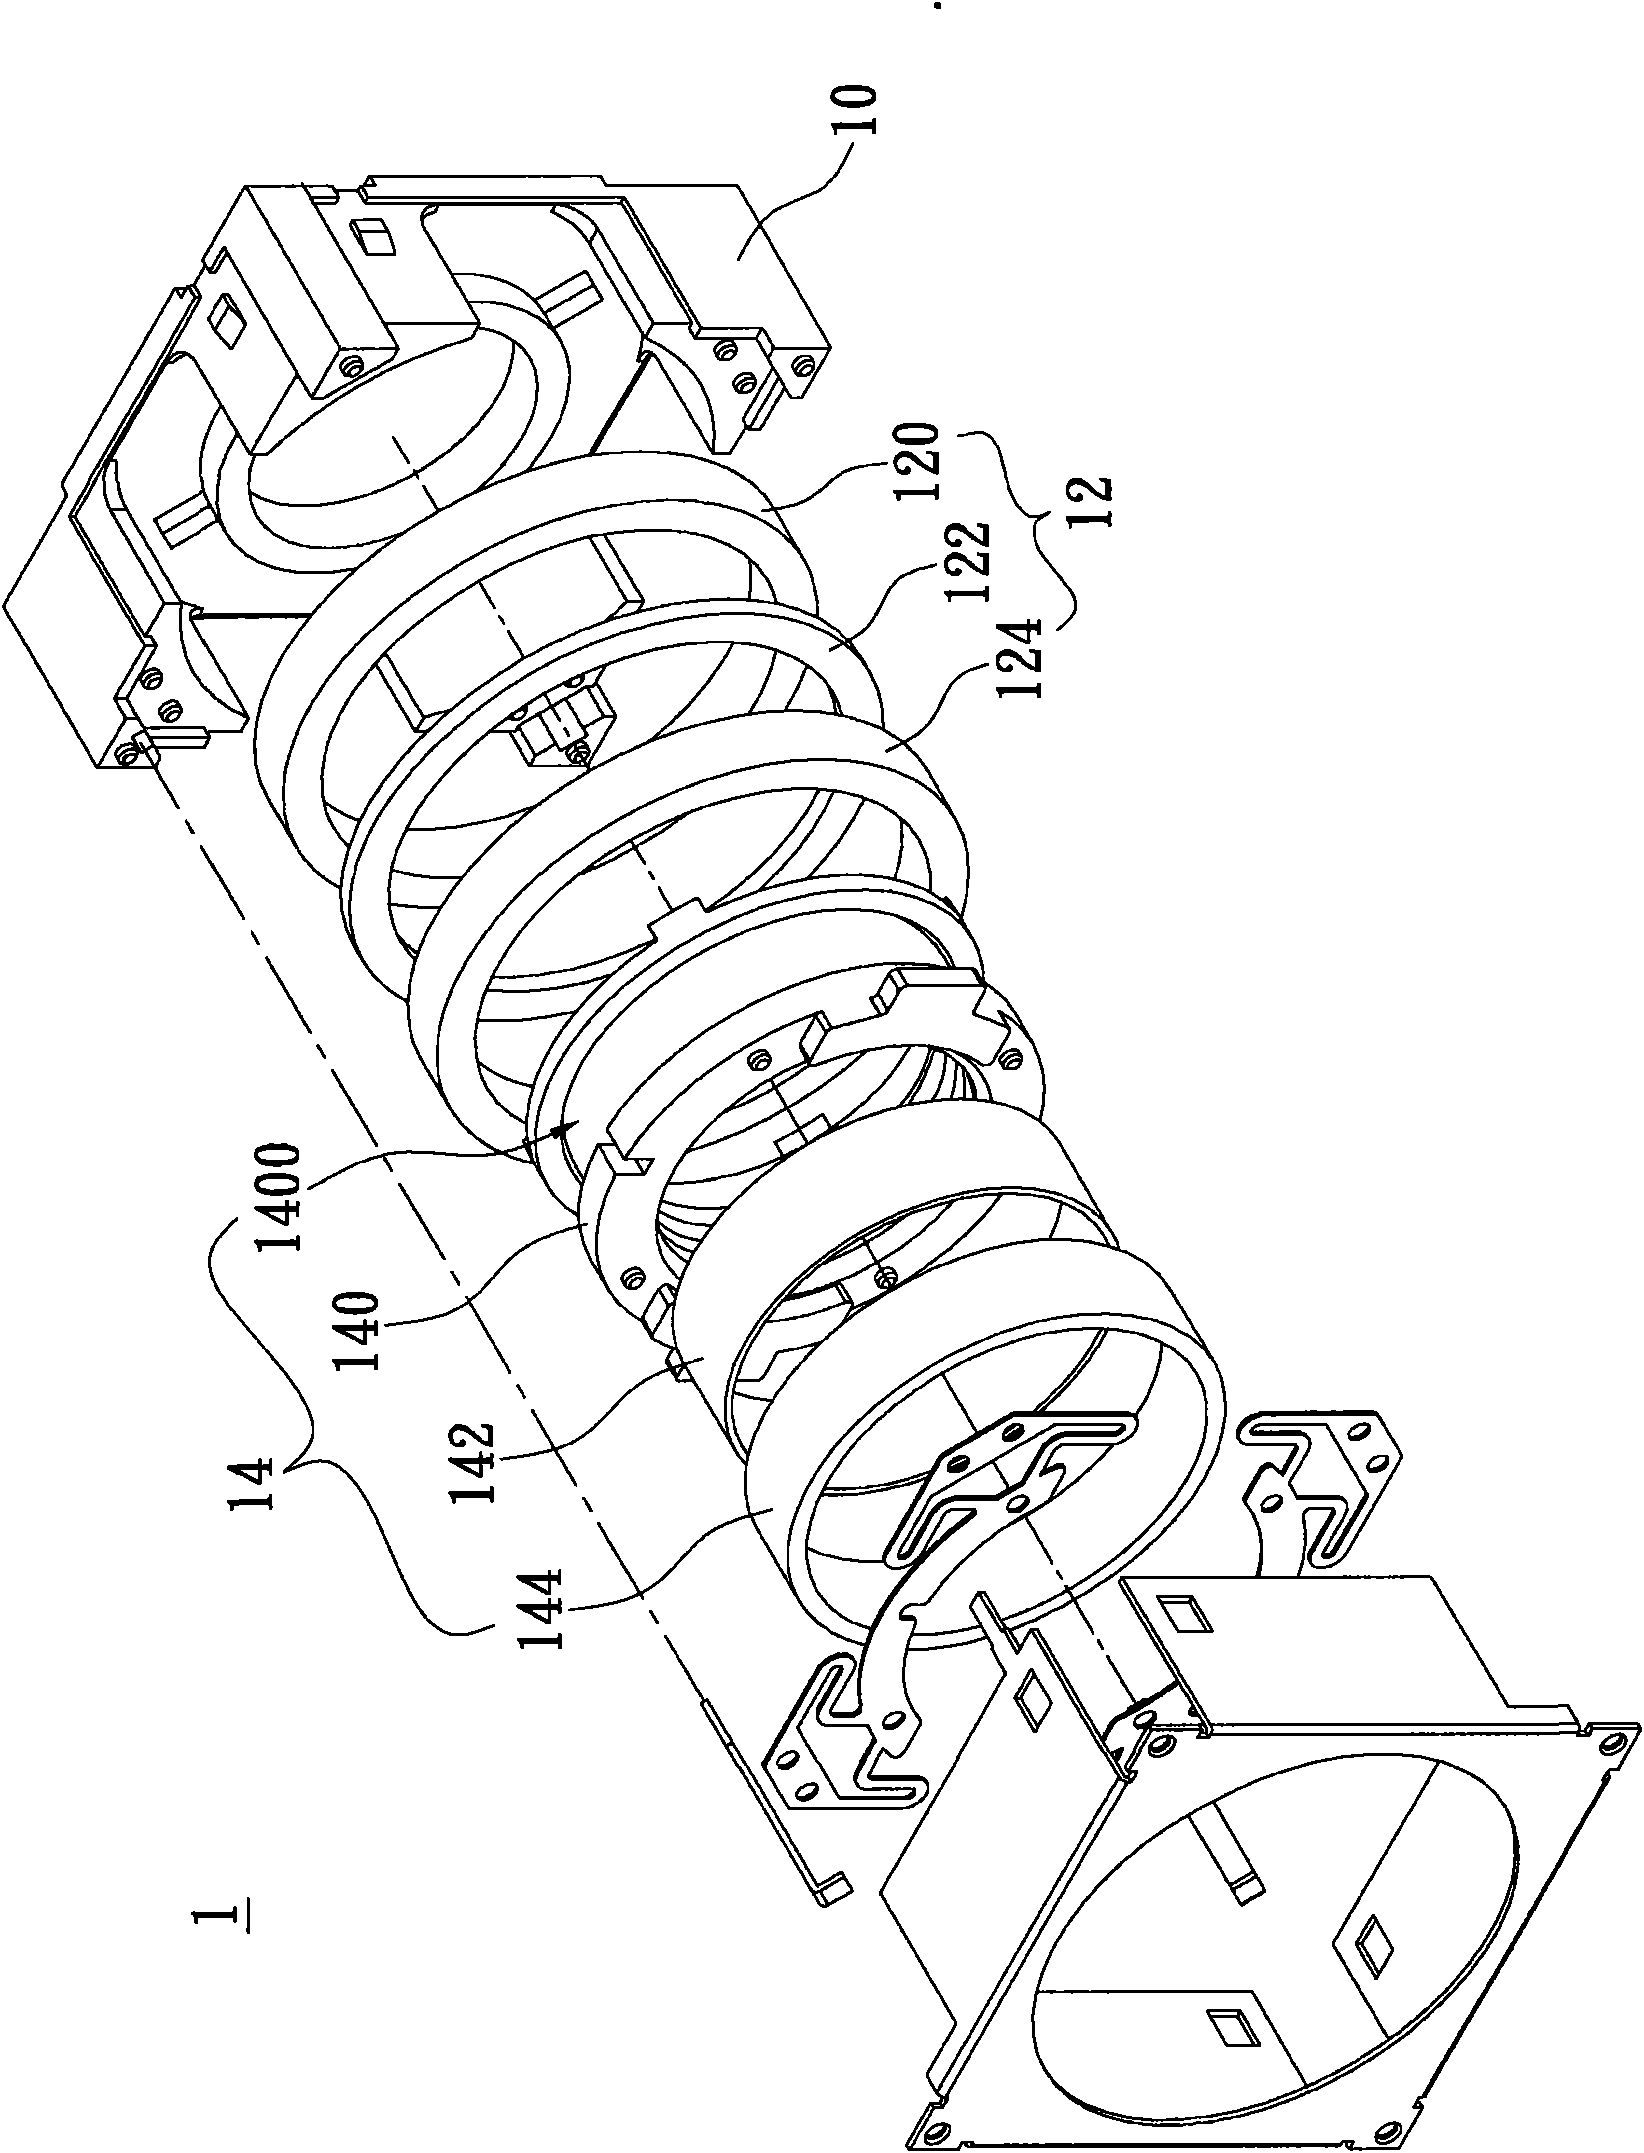 Lens actuating device